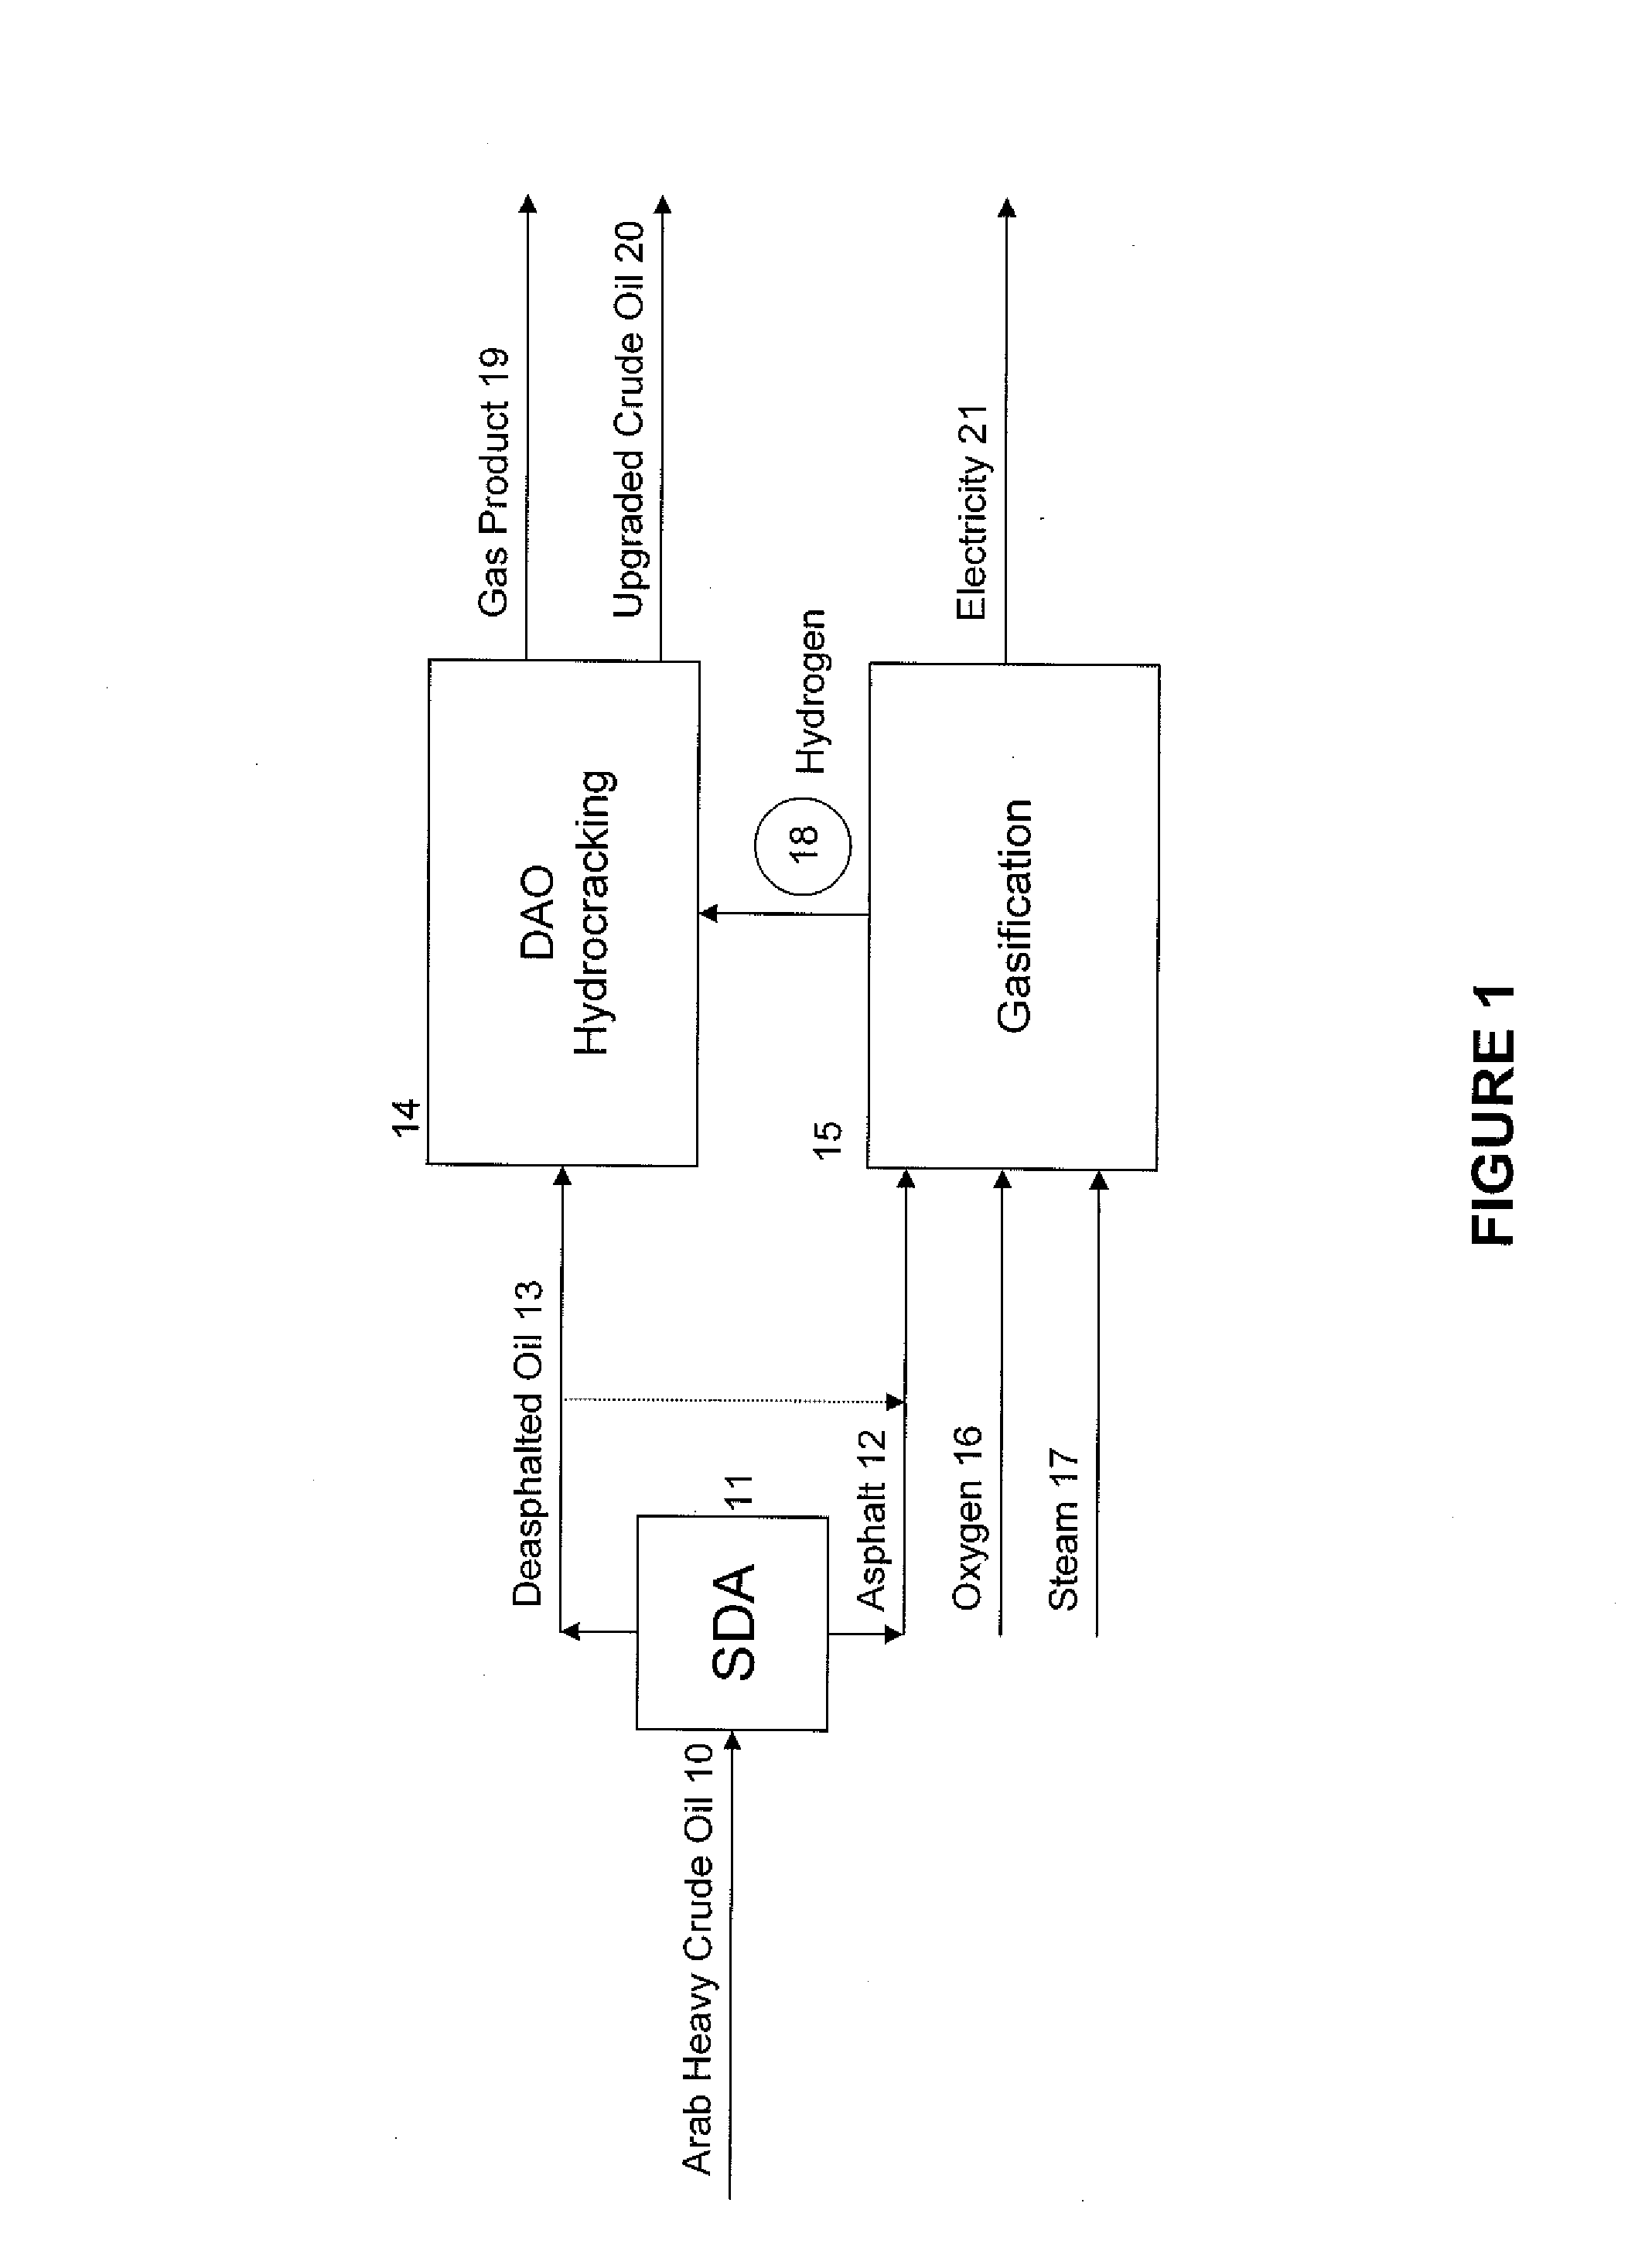 Integrated process for deasphalting and desulfurizing whole crude oil